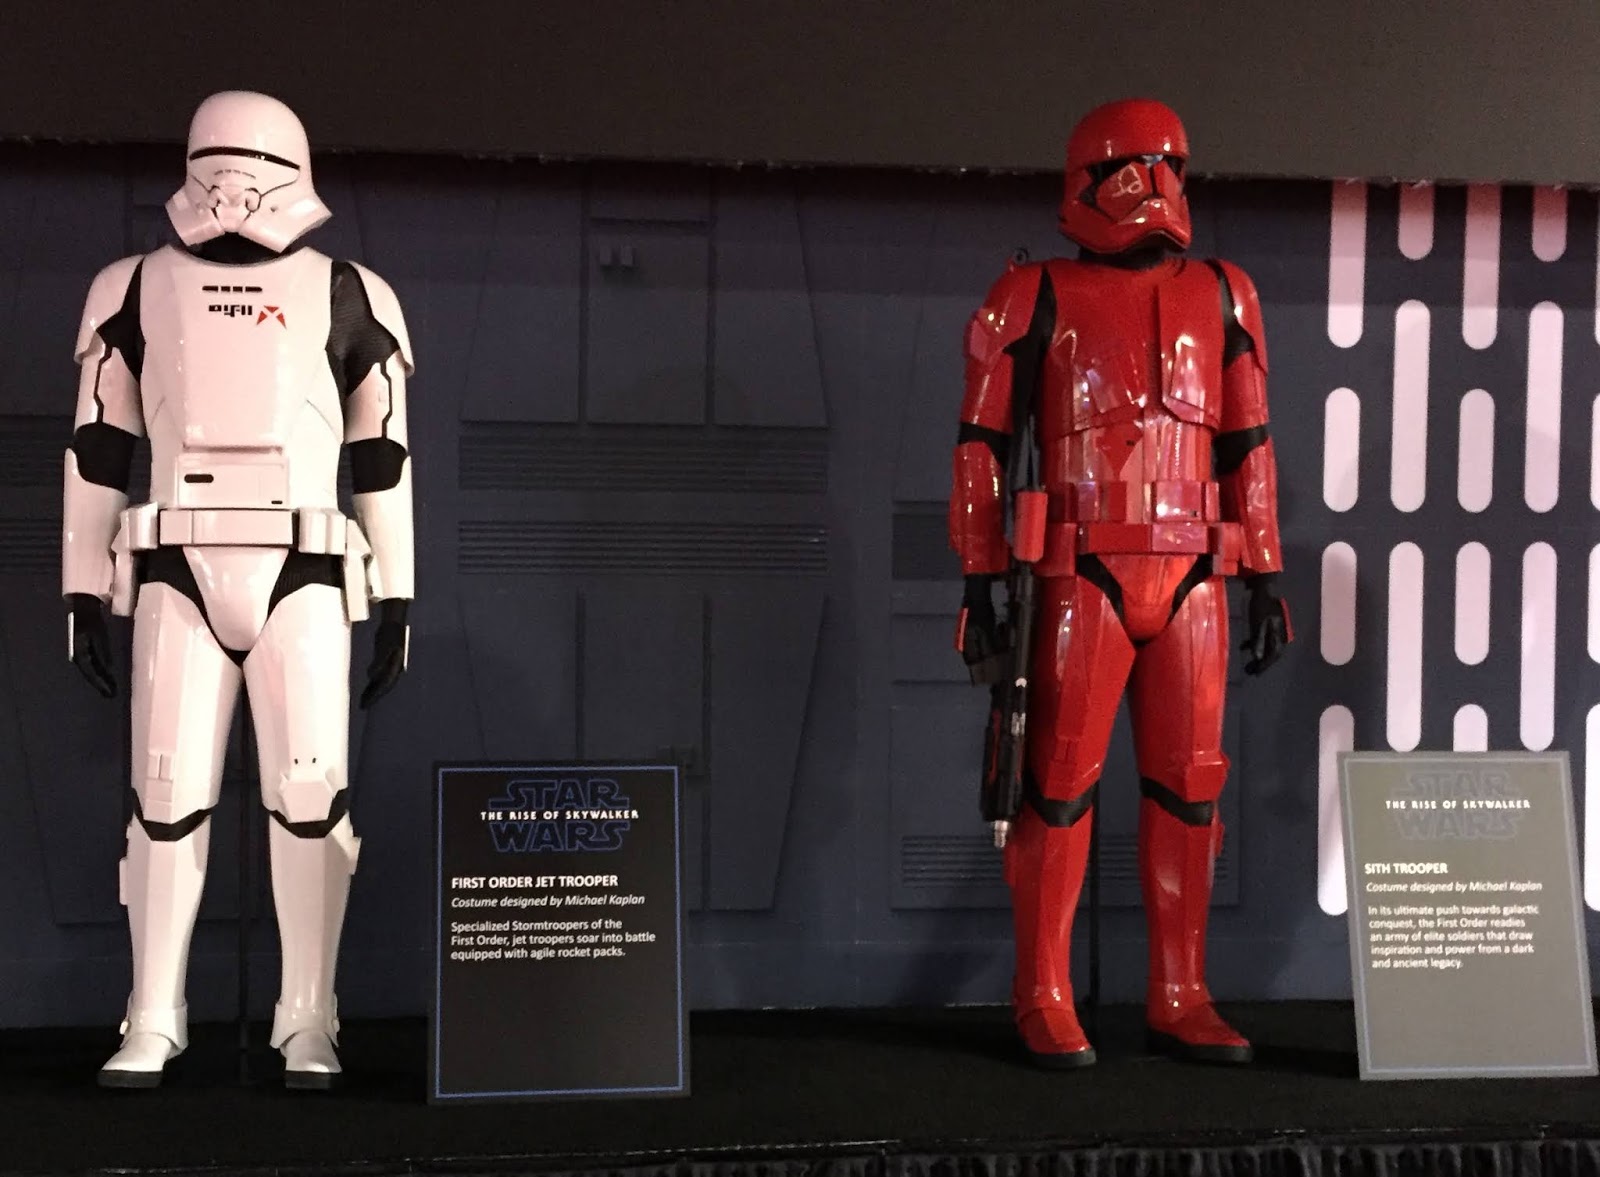 D23 Expo 2019: First Look at the STAR WARS: THE RISE OF SKYWALKER Jet Trooper